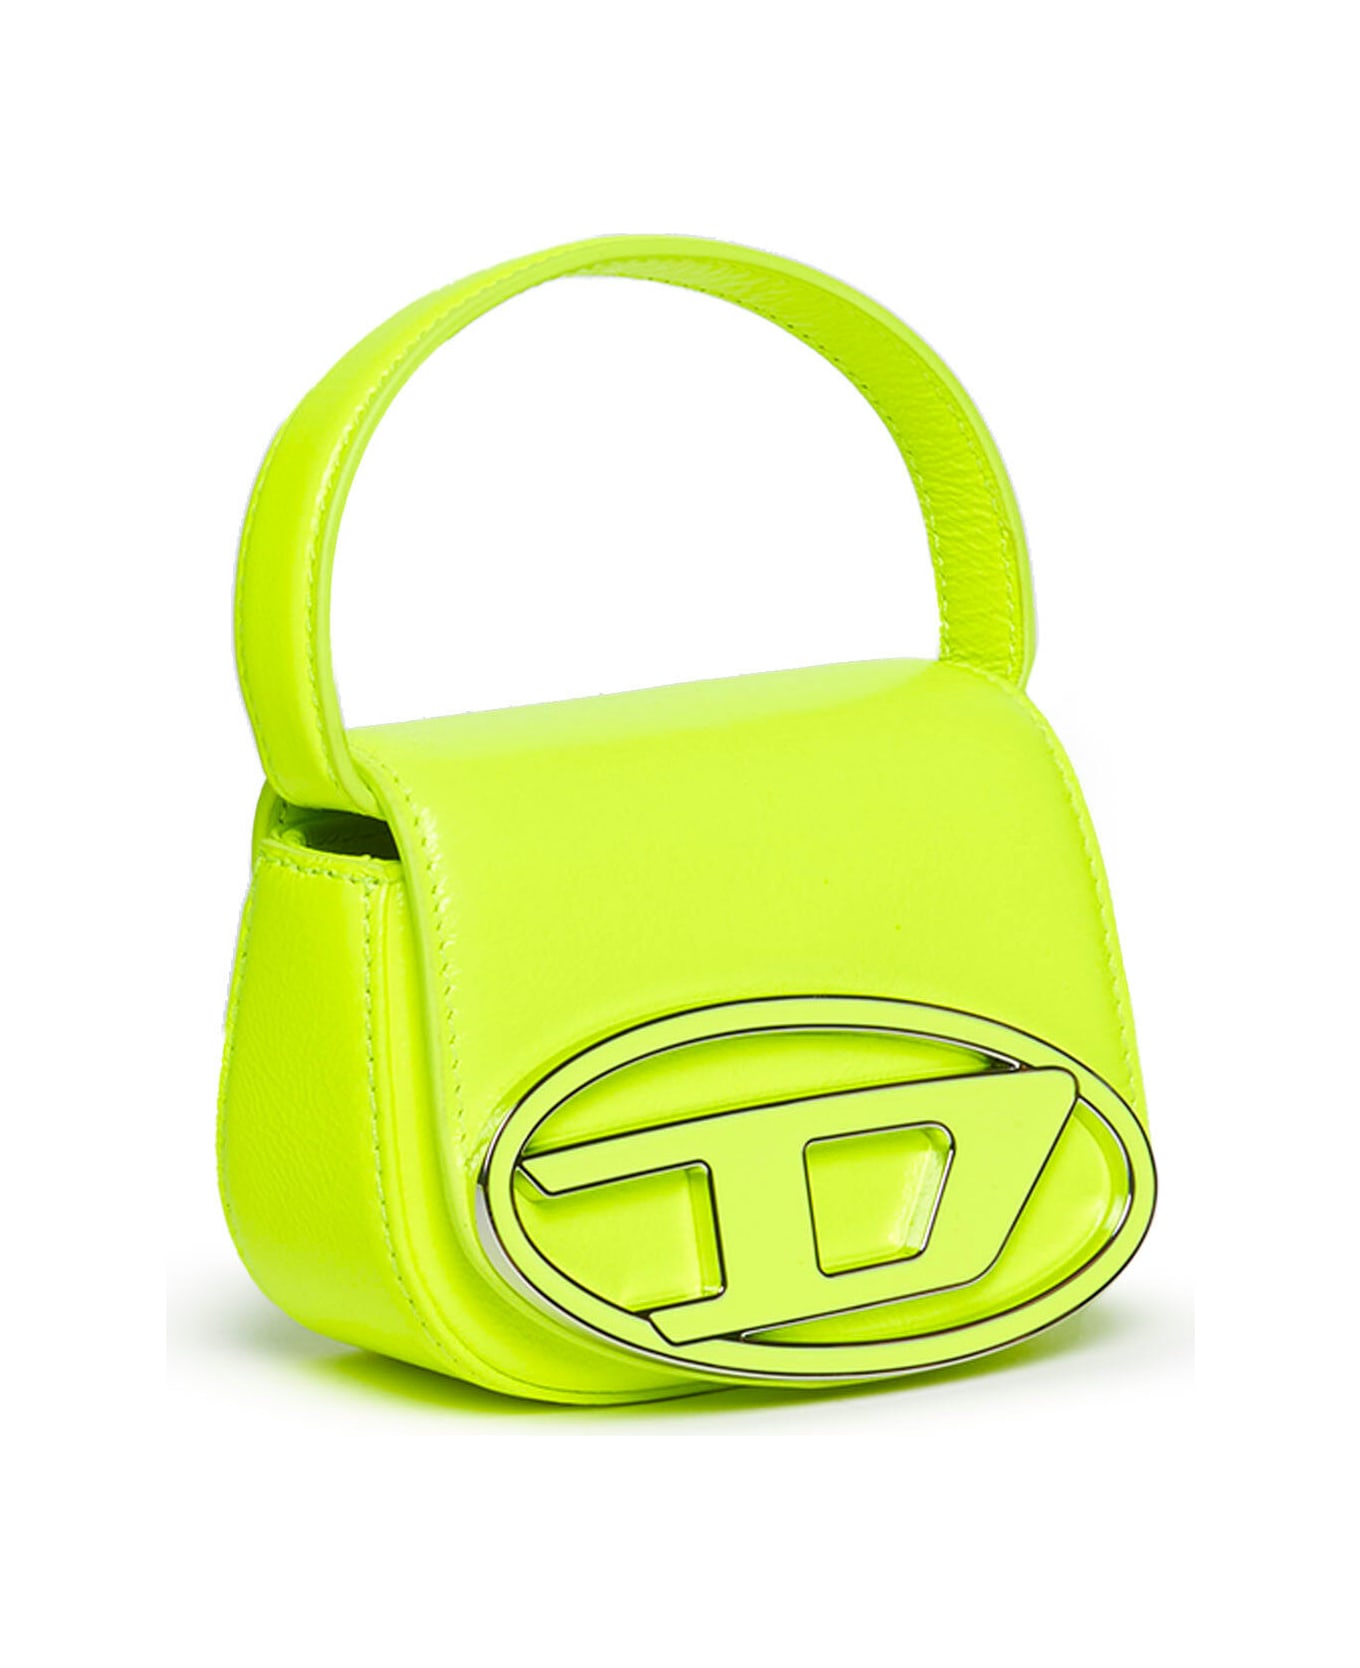 Diesel 1dr Xs Bags Diesel 1dr Xs Bag In Fluo Imitation Leather - Yellow アクセサリー＆ギフト